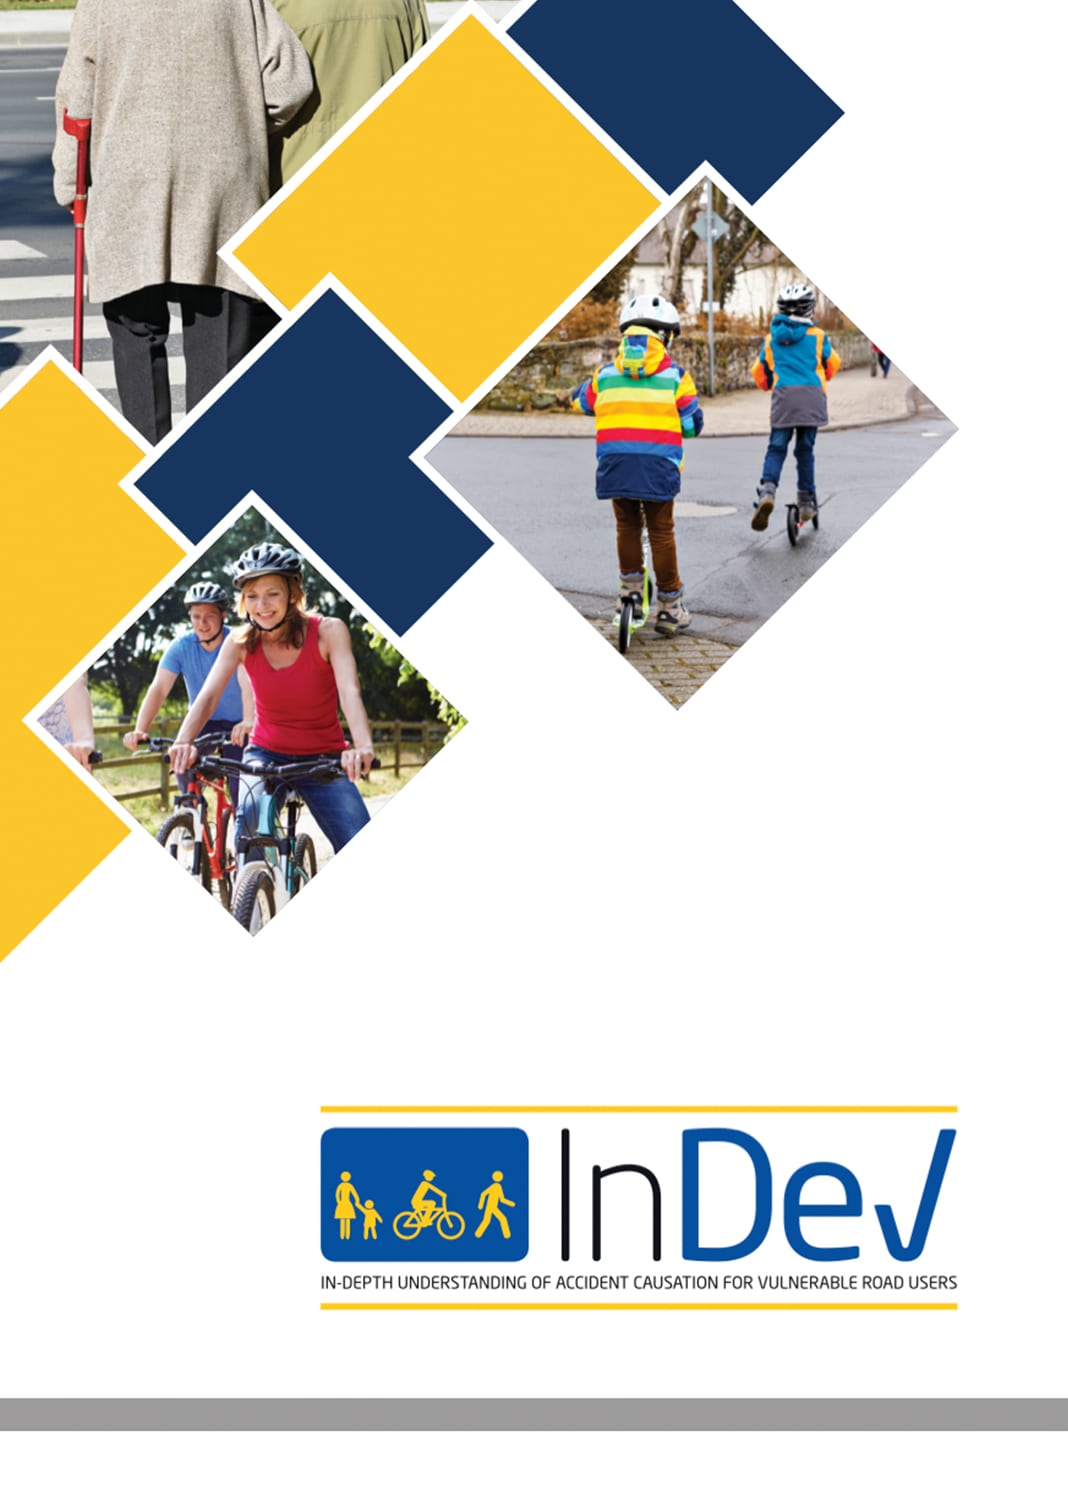 How can data help to prevent accidents involving vulnerable road users?